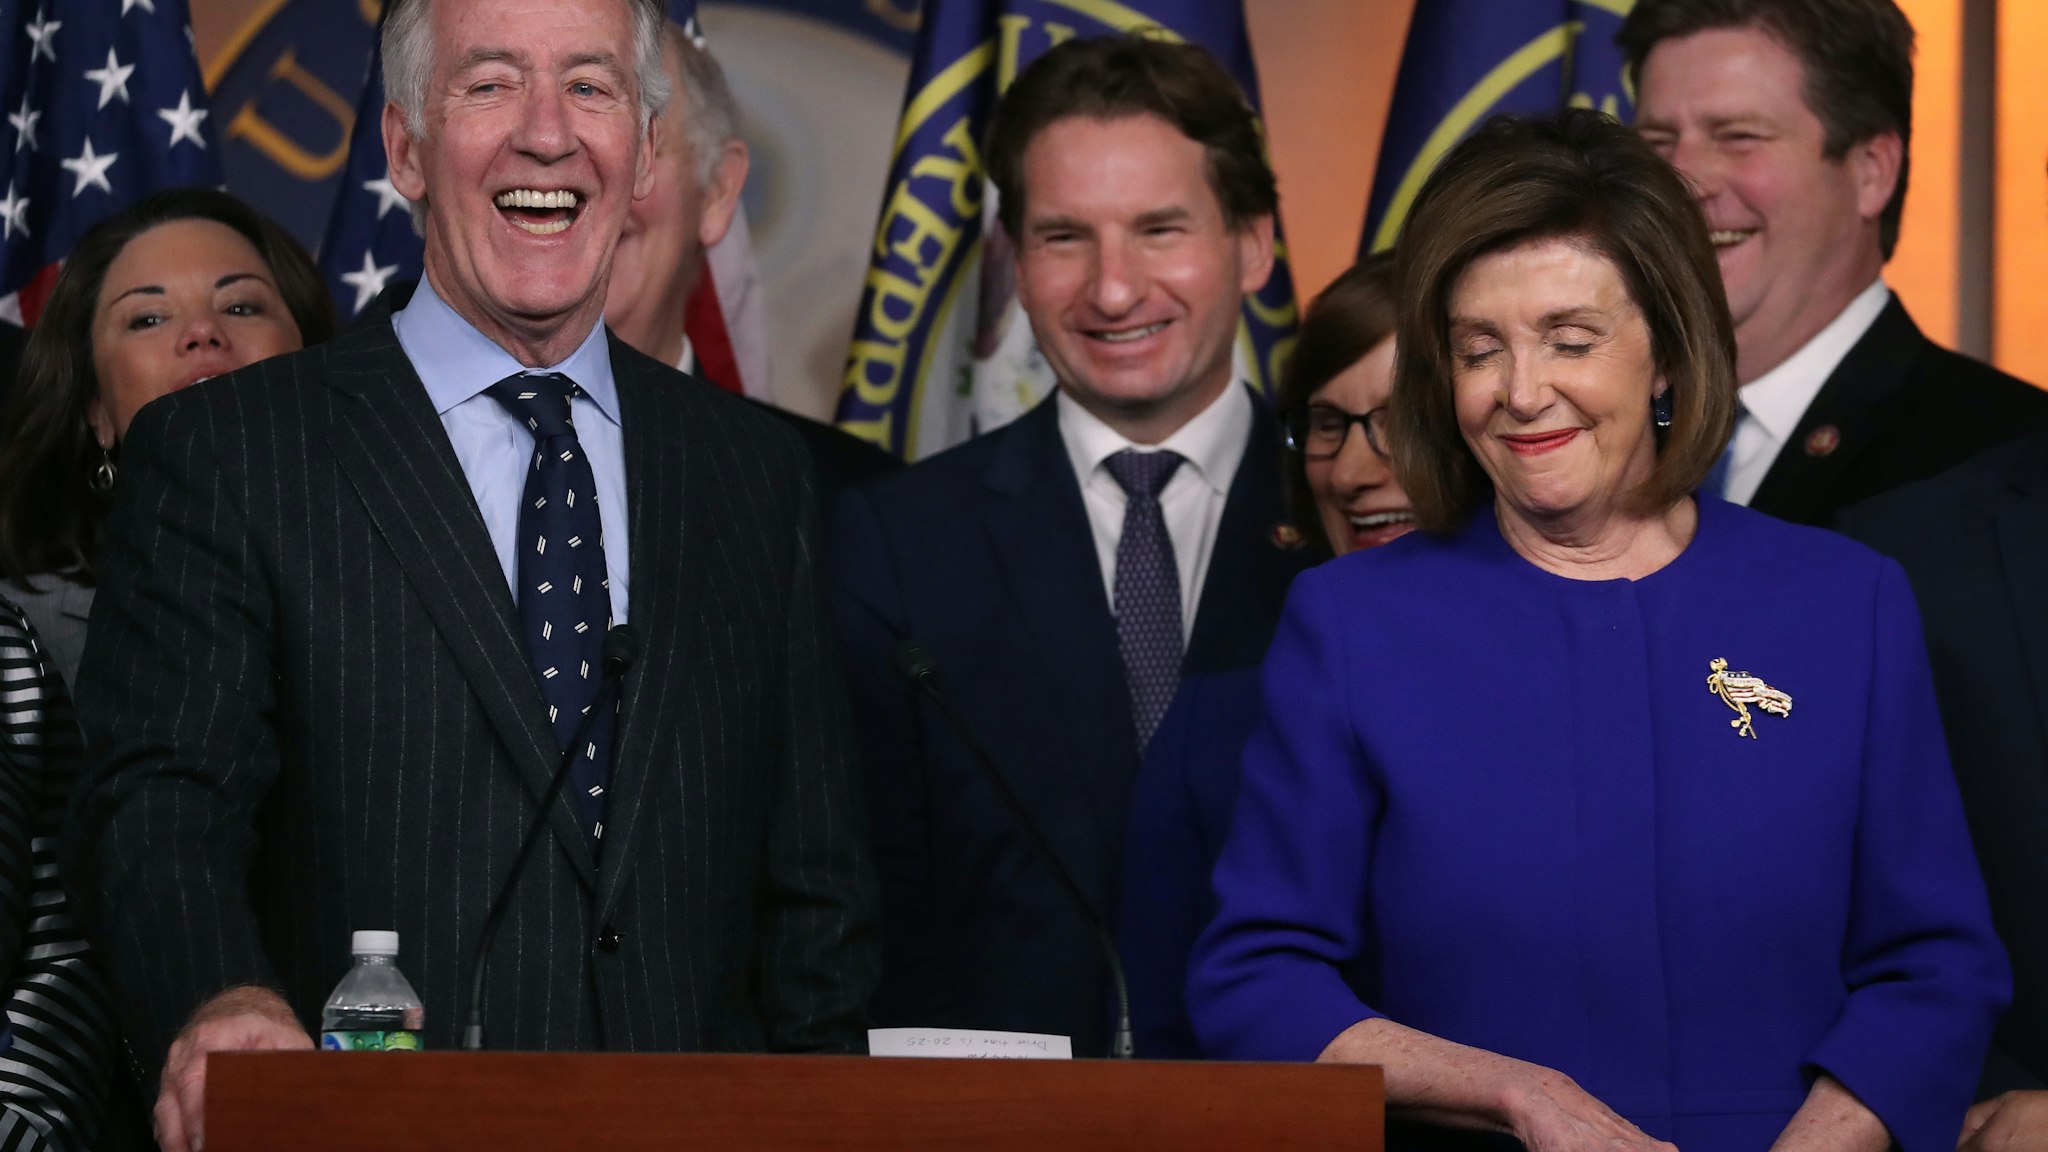 WASHINGTON, DC - DECEMBER 10: U.S. House Speaker Nancy Pelosi (D-CA) and Ways and Means Committee Chairman Richard E. Neal (D-MA) (L), speak during a news conference on the USMCA trade agreement, on Capitol Hill December 10, 2019 in Washington, DC.Pelosi said an agreement has been reached on a deal over the U.S.-Mexico-Canada, but final details for the trade pact were still being ironed out. (Photo by Mark Wilson/Getty Images)